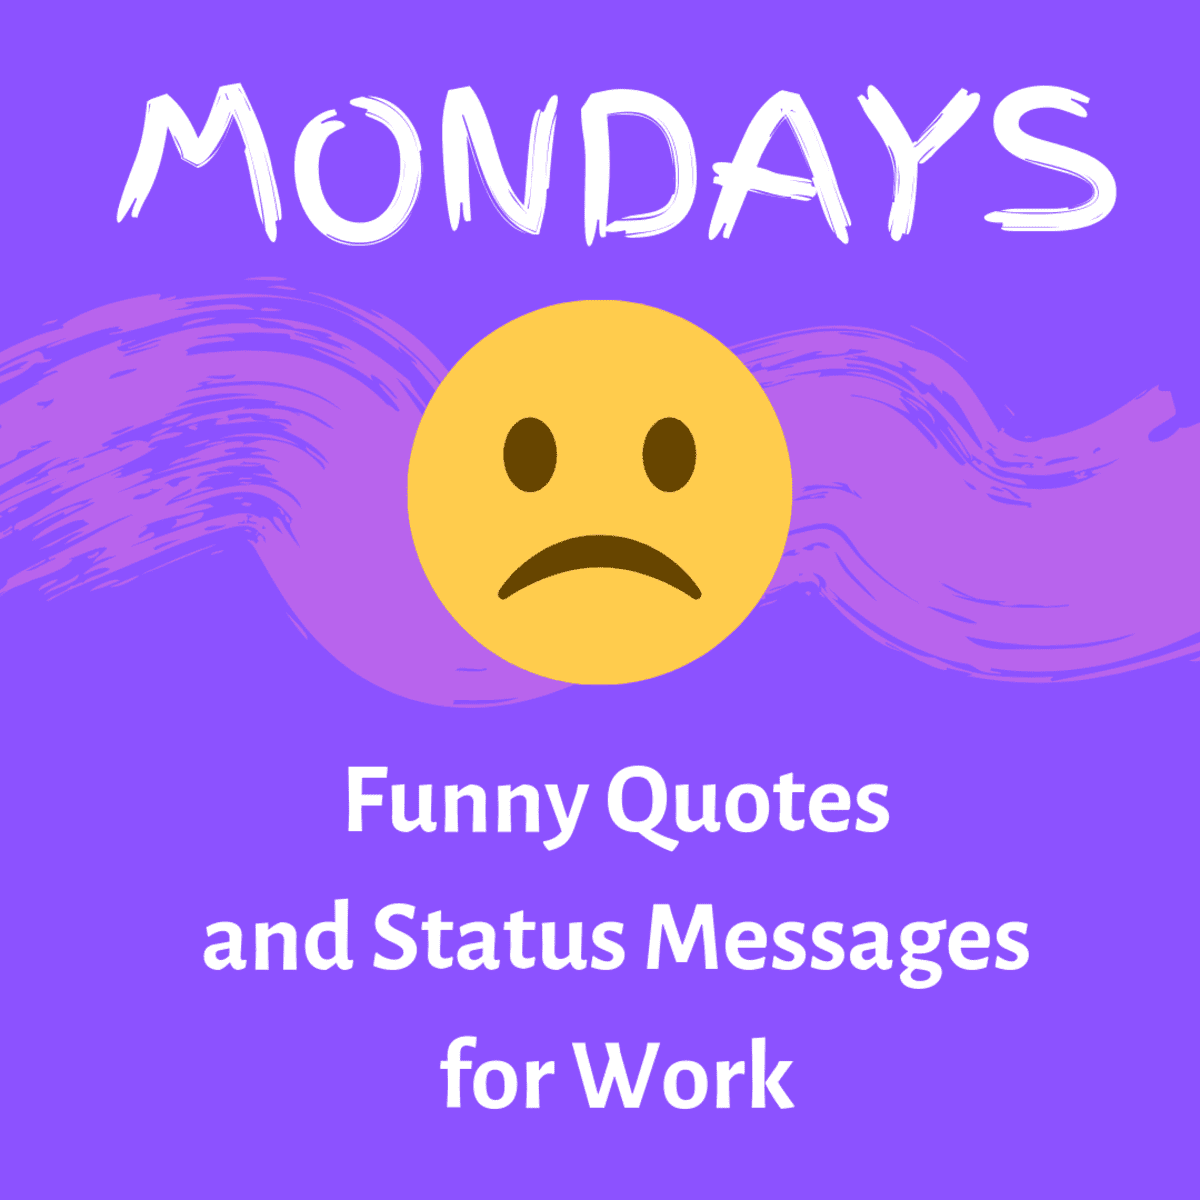 Funny Monday Quotes for Work: Statuses and Pictures - Holidappy